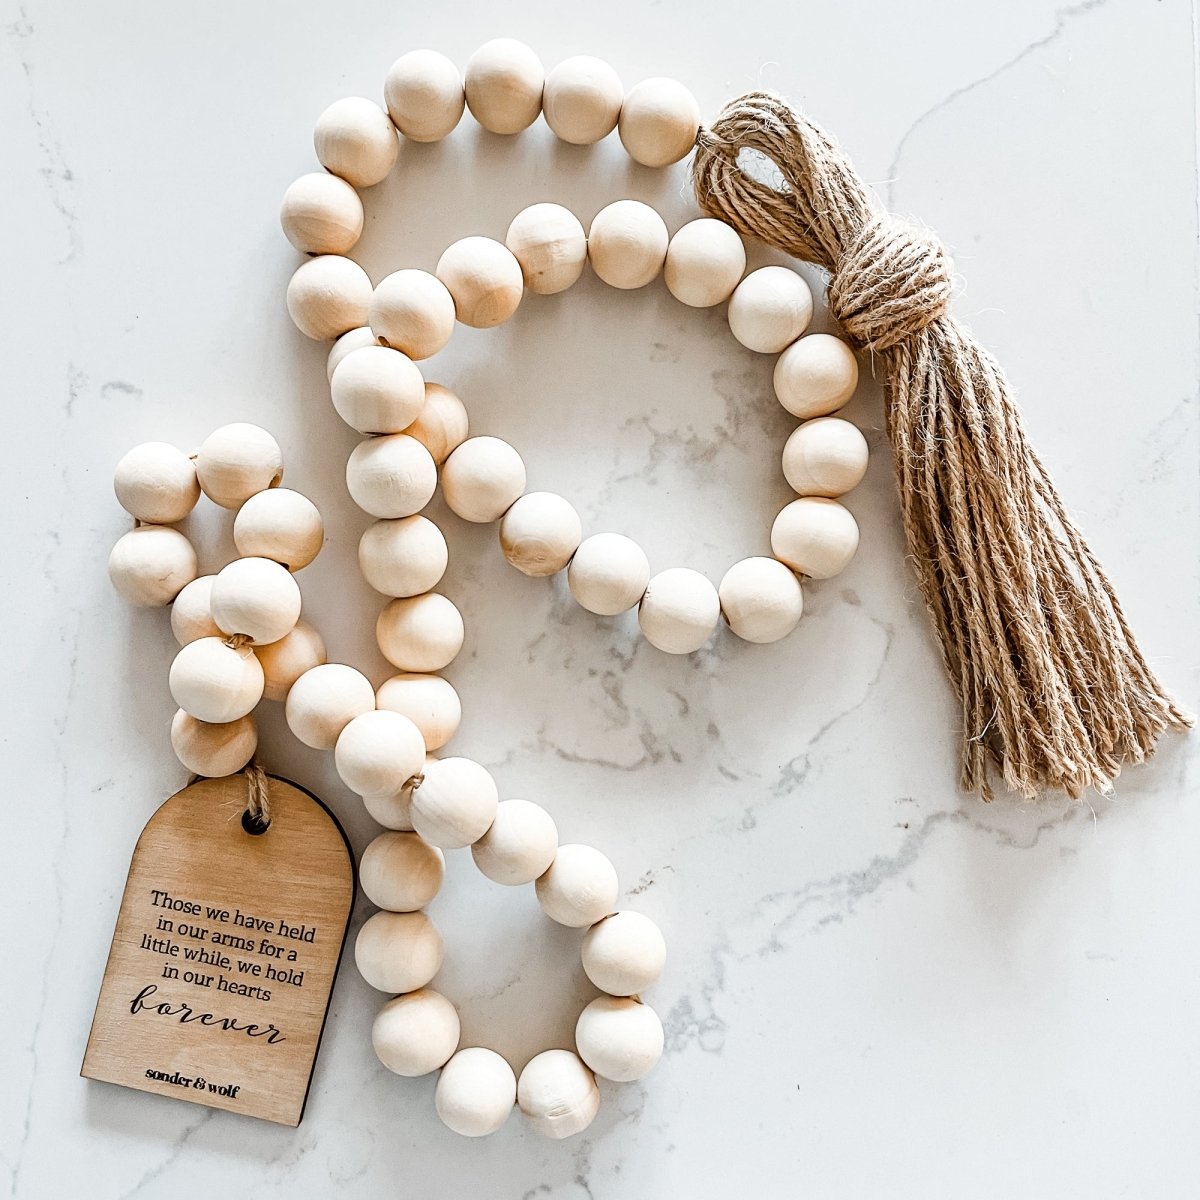 Load image into Gallery viewer, Wood Bead Garland with those we have held in our hearts tag - sonder and wolf
